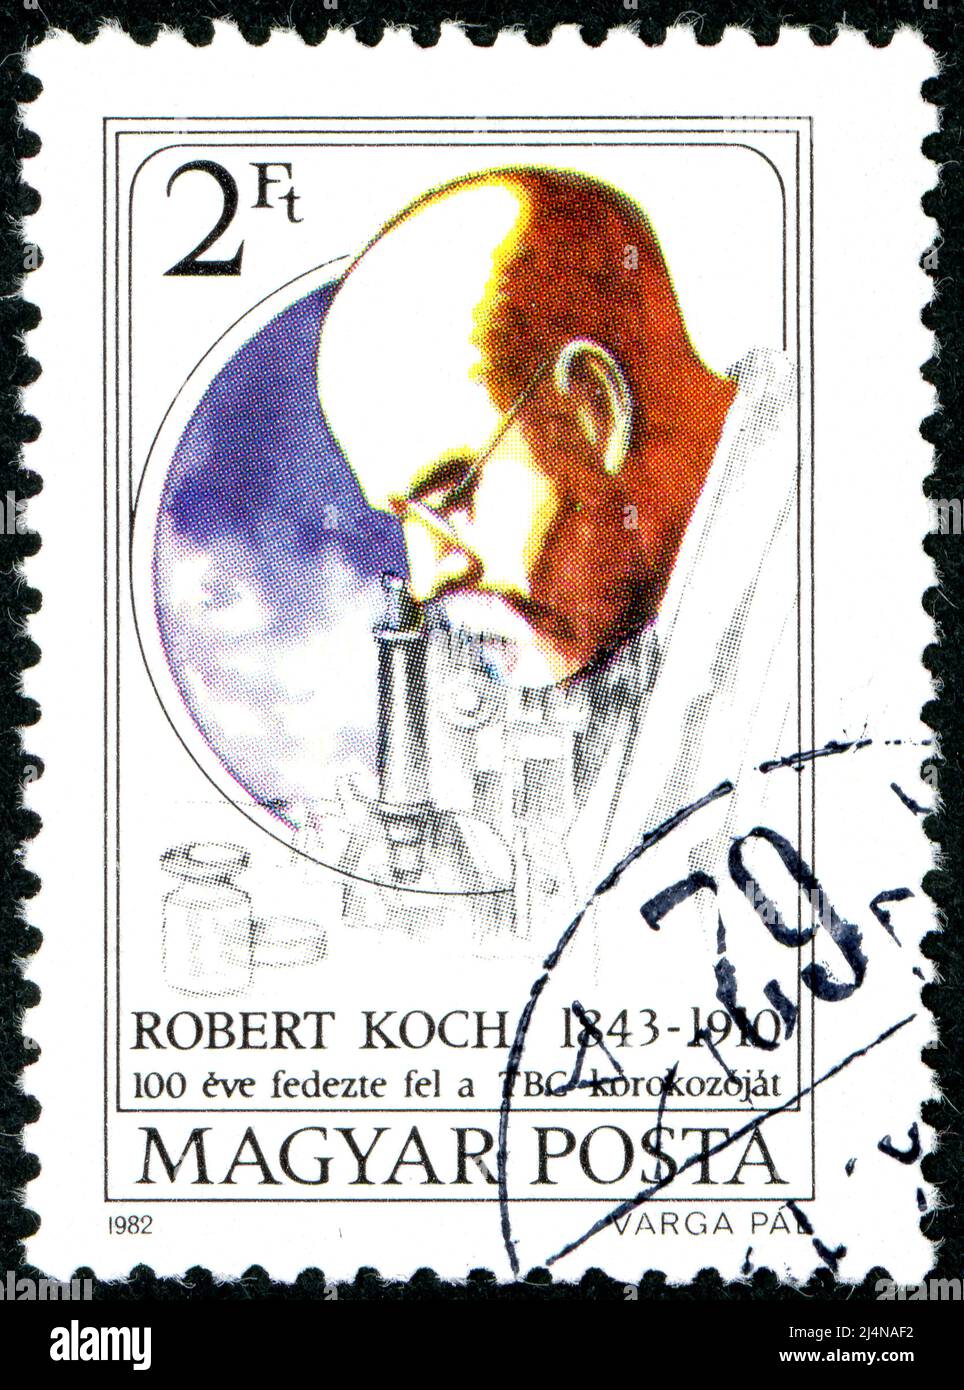 HUNGARY - CIRCA 1982: Postage stamp printed in Hungary, showing portrait of a German bacteriologist and microbiologist - Robert Koch, circa 1982 Stock Photo